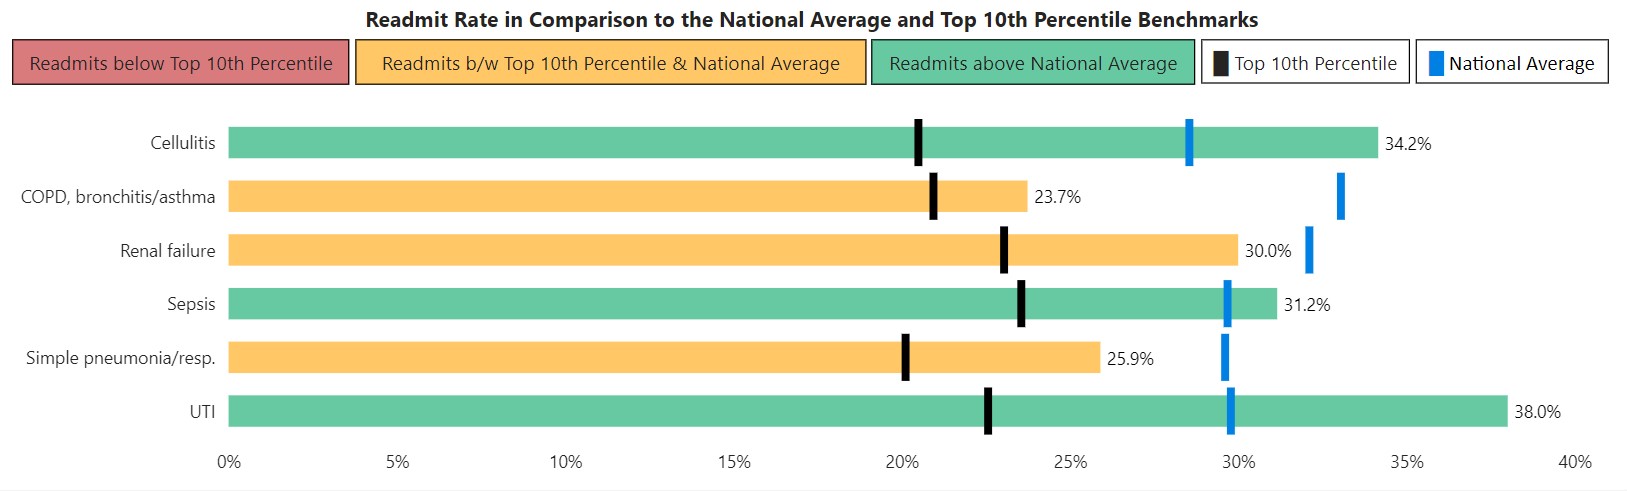 FIGURE 1: READMIT RATES IN COMPARISON TO NATIONAL AVERAGE AND TOP 10TH PERCENTILE BENCHMARKS